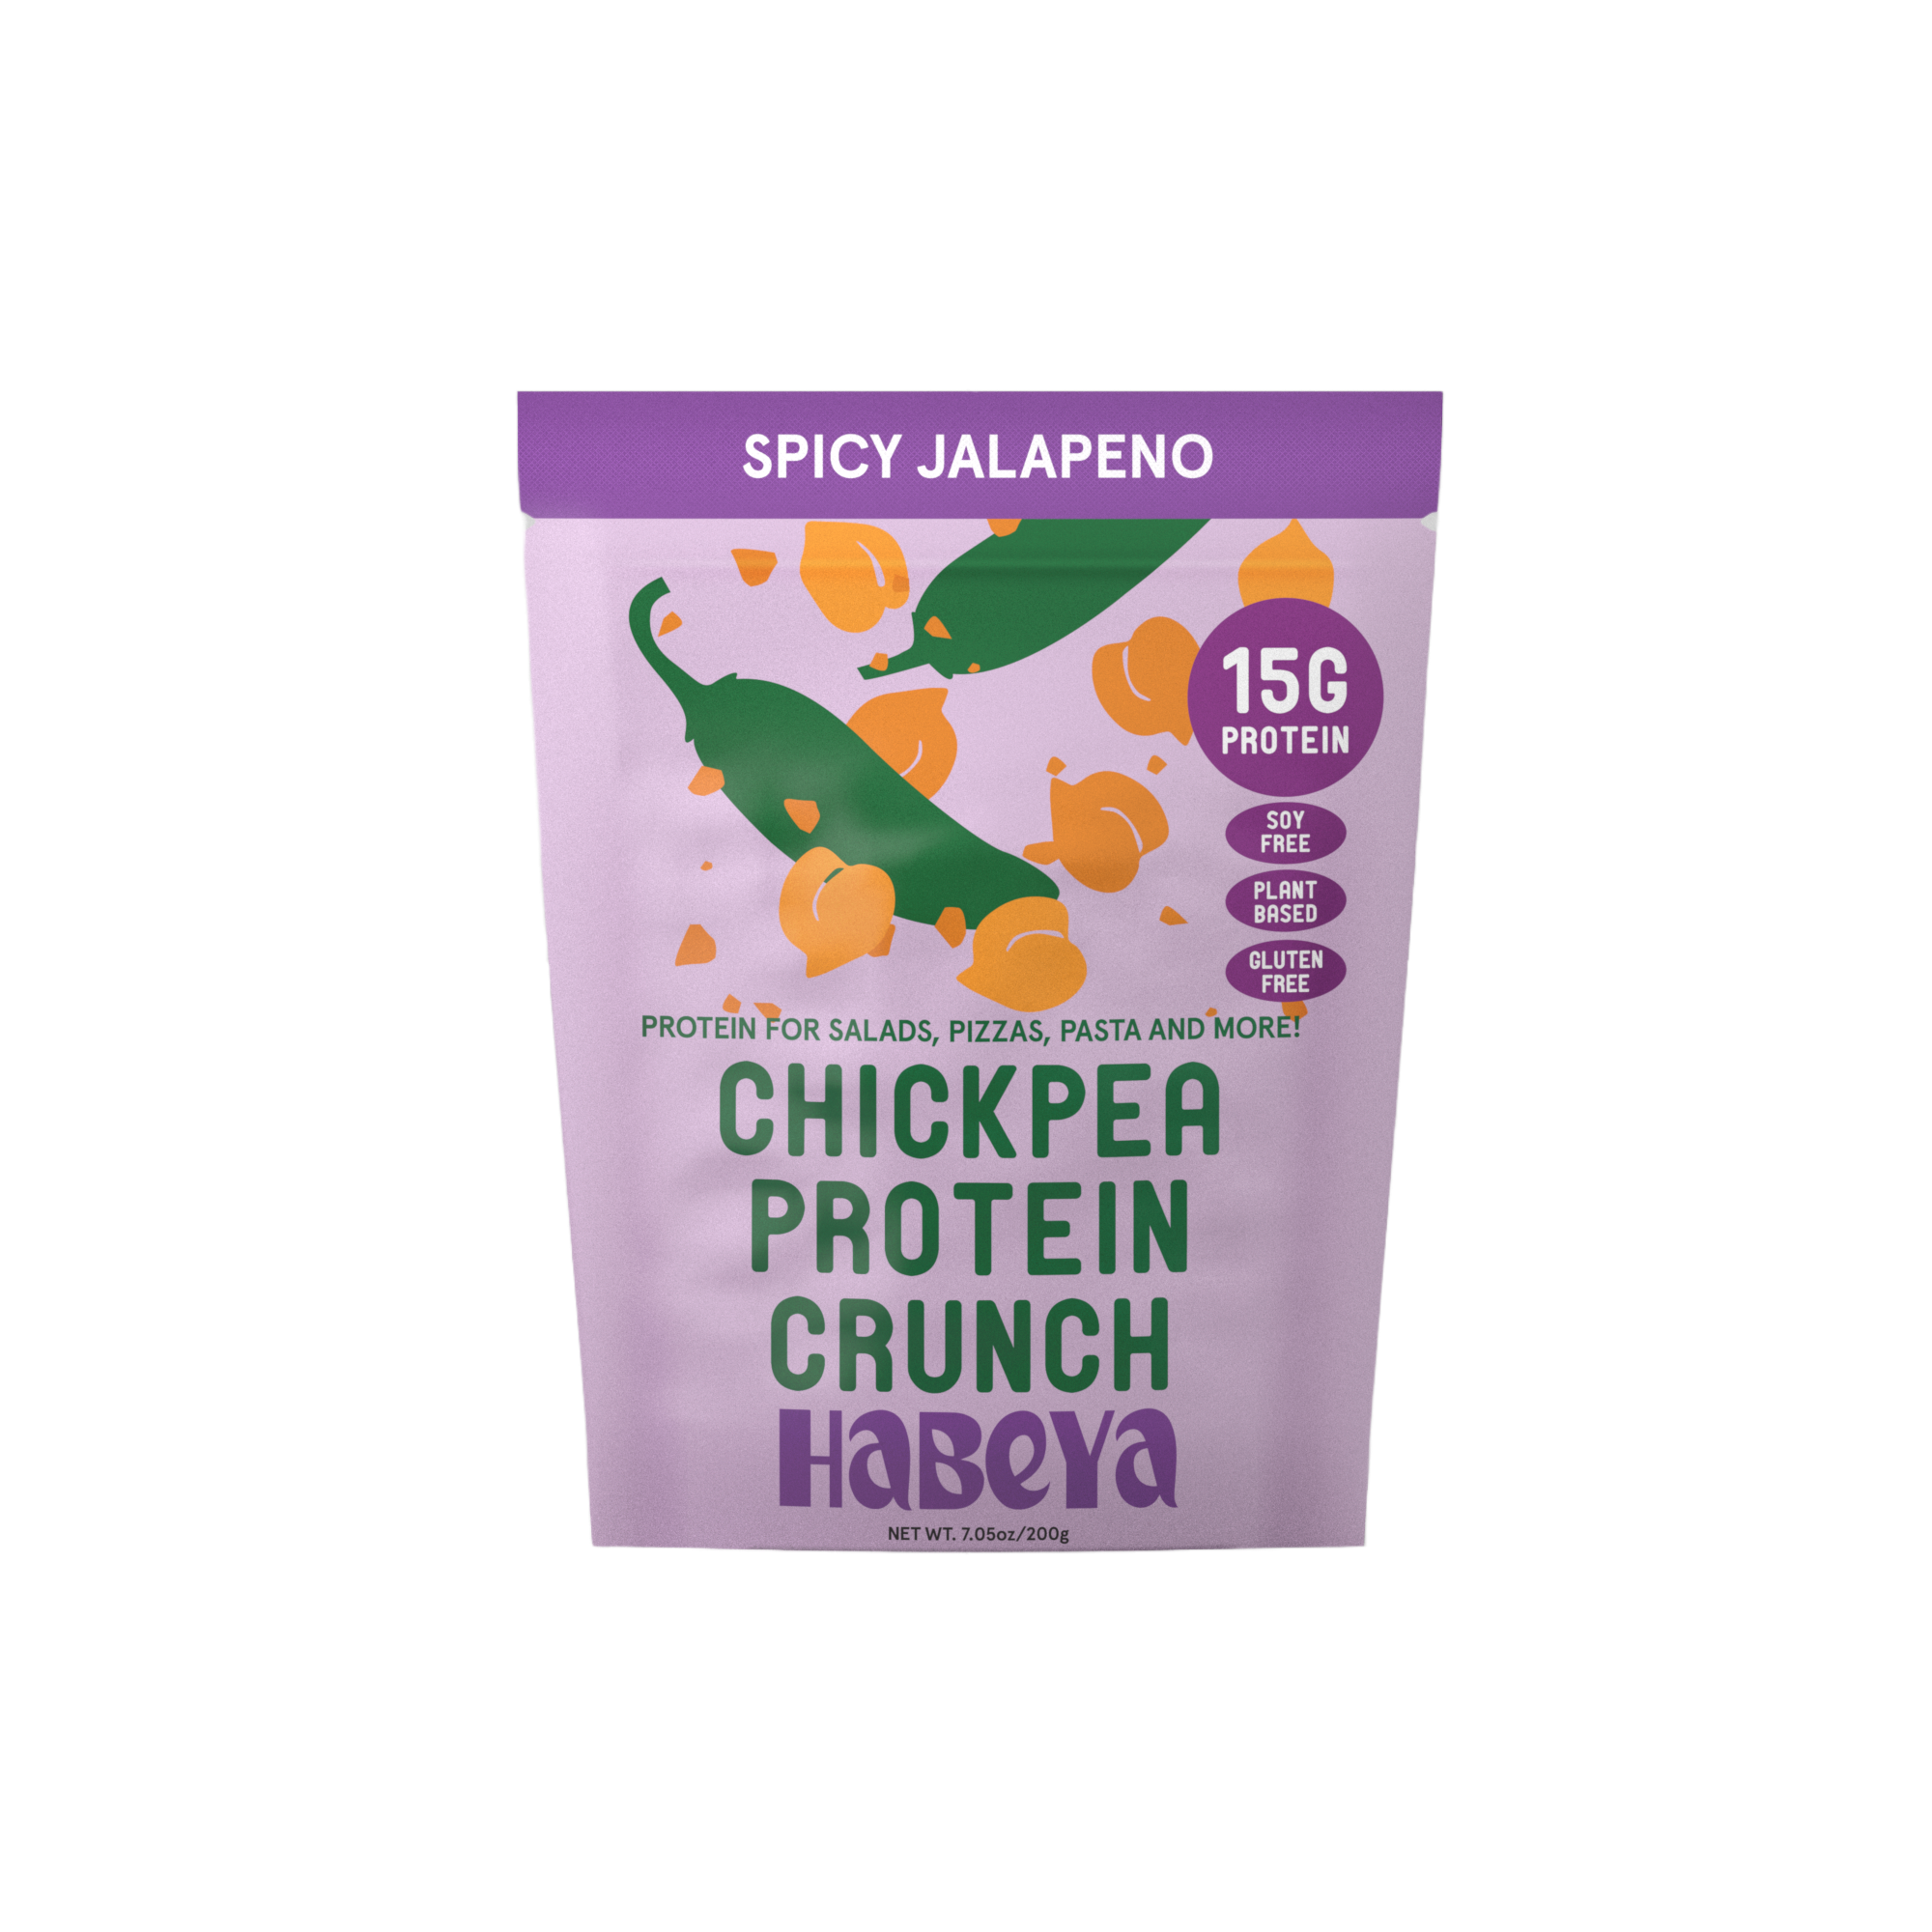 Spicy Jalapeño Chickpea Protein Crunch (3 pack)